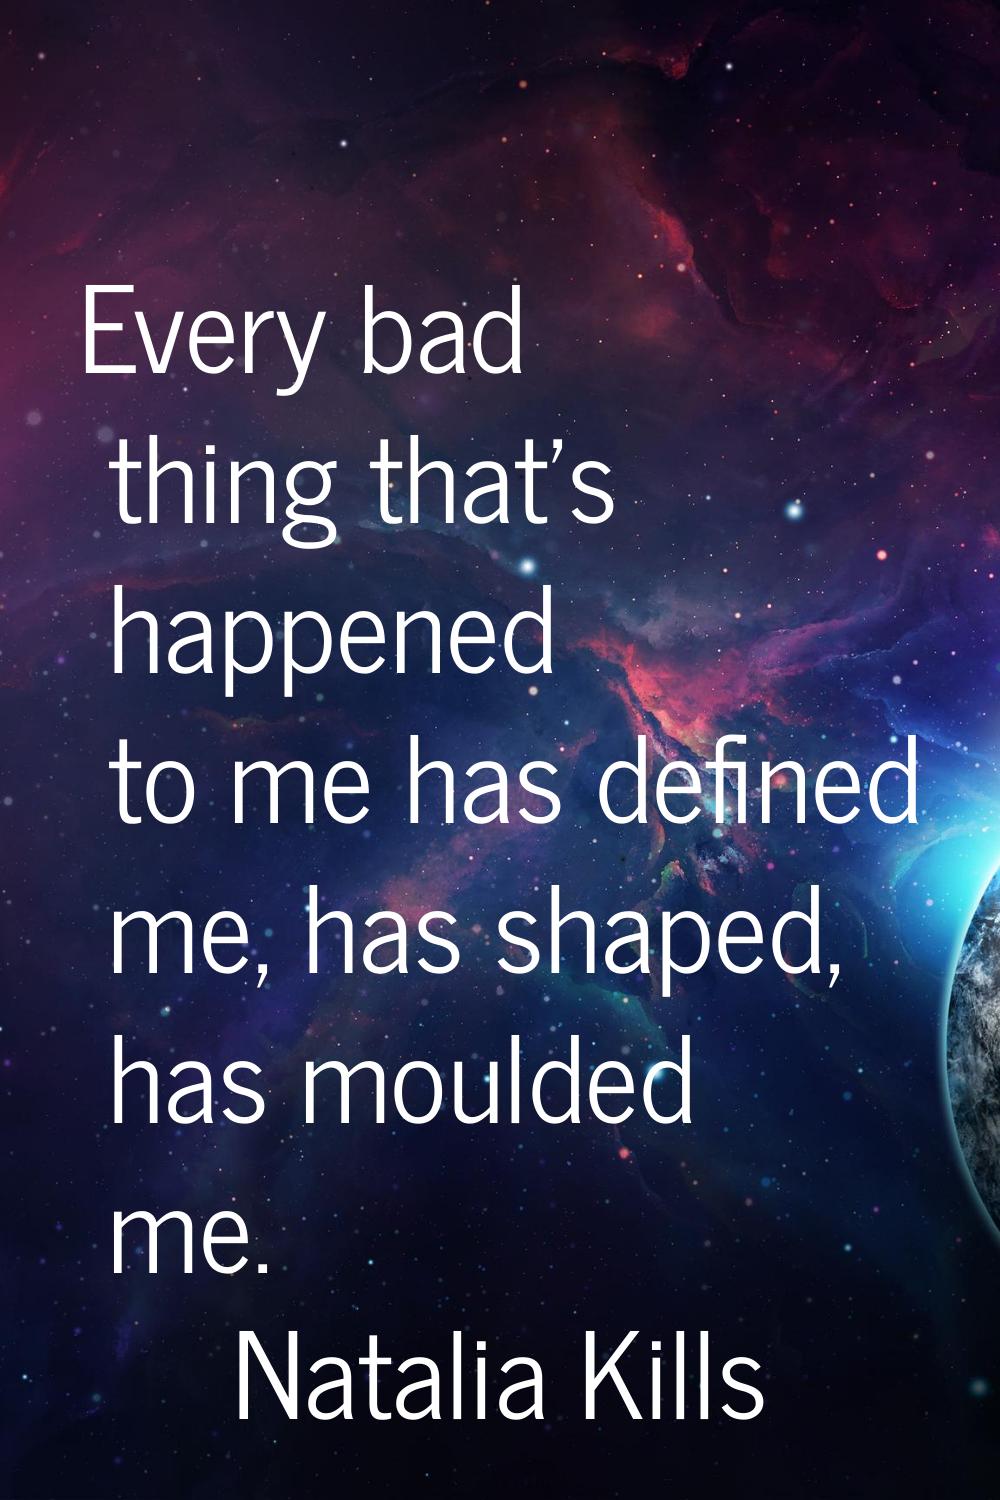 Every bad thing that's happened to me has defined me, has shaped, has moulded me.